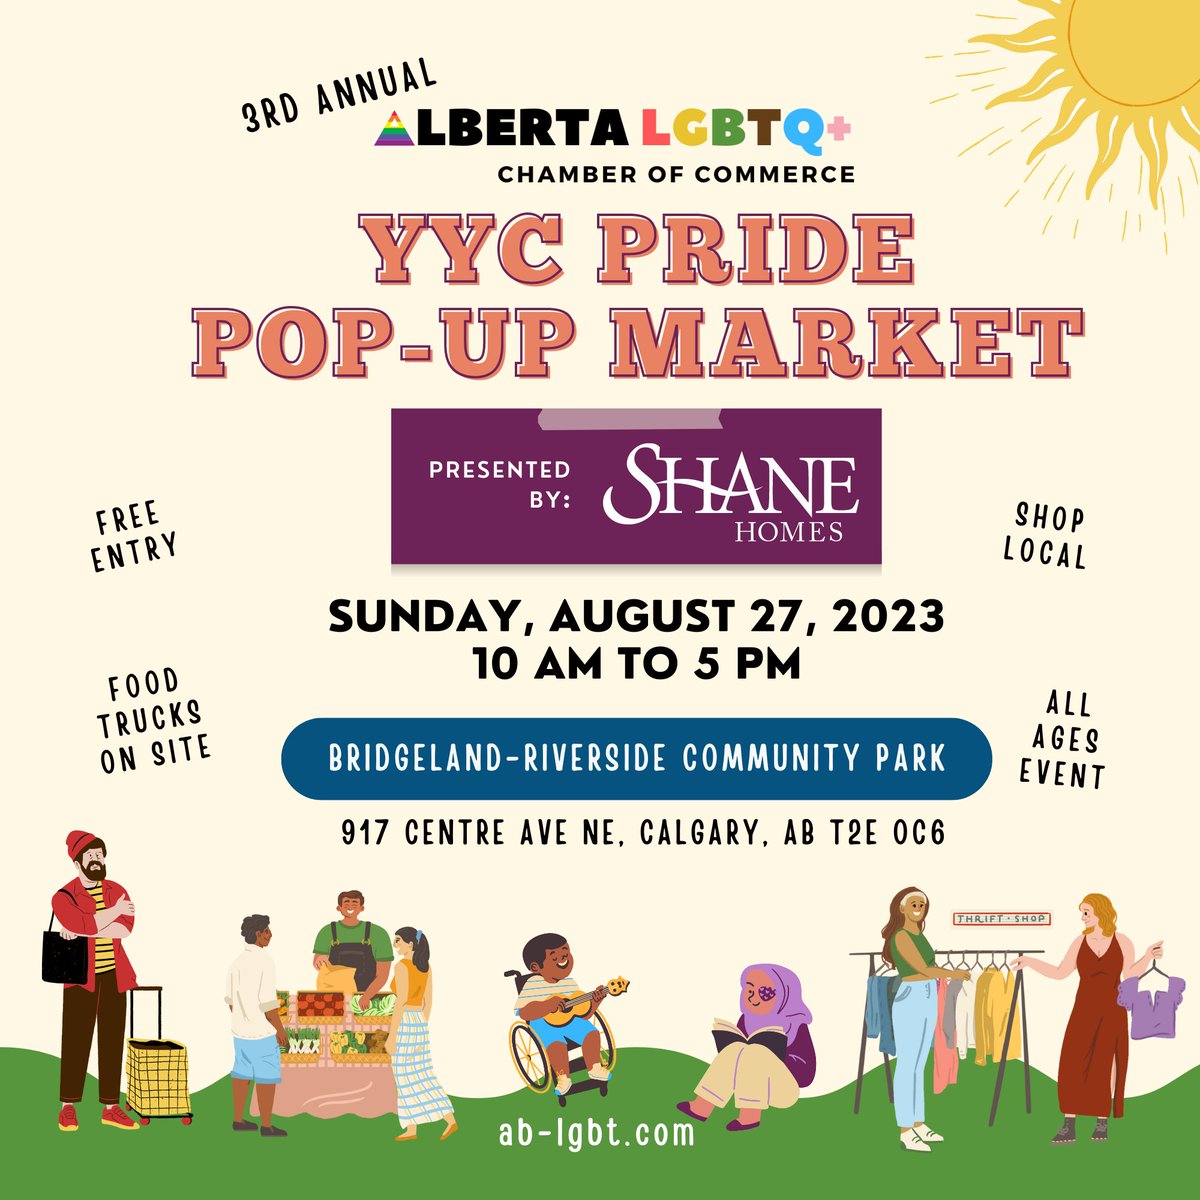 𝗣𝗥𝗘𝗦𝗘𝗡𝗧𝗘𝗗 𝗕𝗬 𝗦𝗛𝗔𝗡𝗘 𝗛𝗢𝗠𝗘𝗦
Join us at the 🌈YYC Pop-up Pride Market🌈 to shop local businesses🛍️, and enjoy an exciting drag performance 👑

#ablgbt #yyc #yeg #alberta #ablgbtchamber #businessAB #supportlocal #albertabusiness #supportlocalalberta #shanehomes